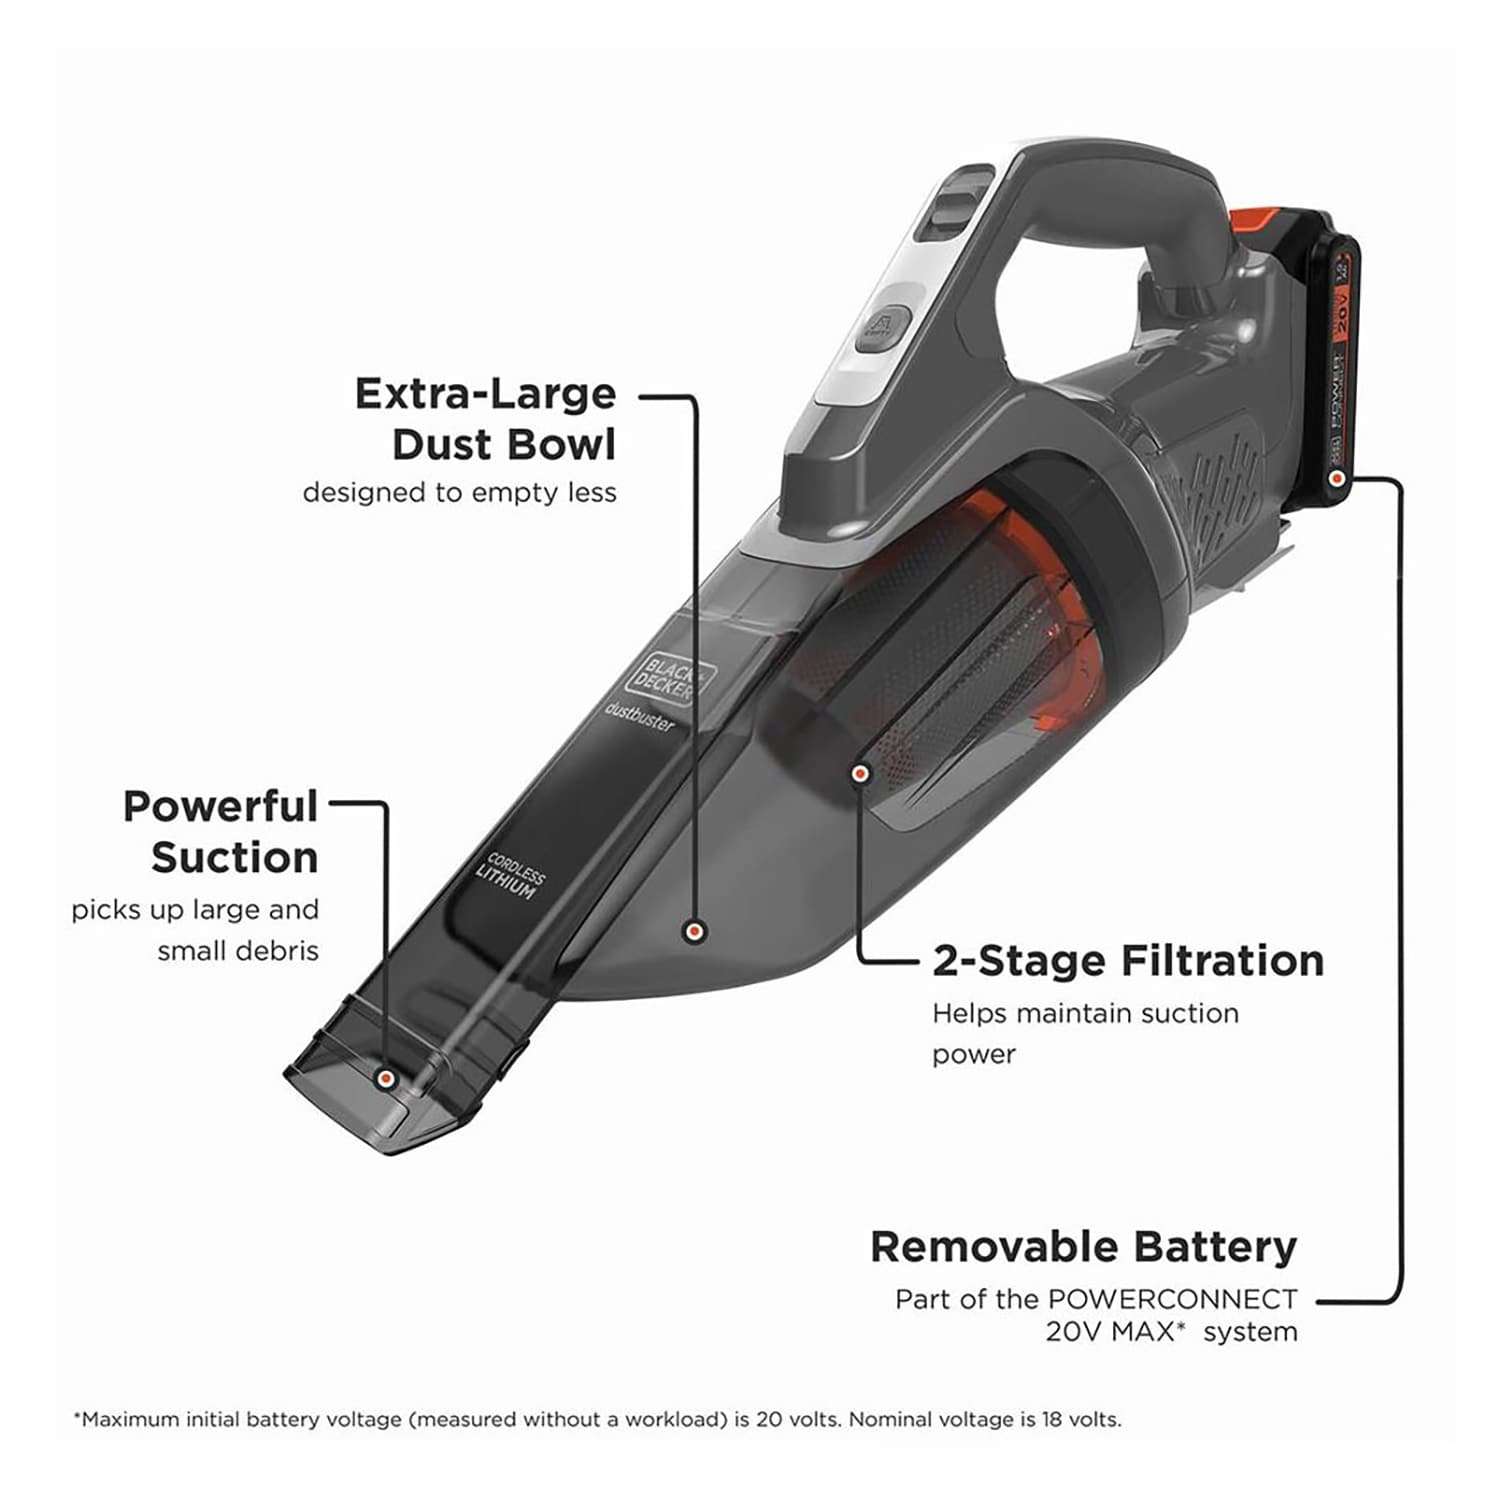 BLACK+DECKER 20V MAX Battery, 1.5Ah Lithium Ion Battery, Extended Runtime,  Compatible with Tools, Outdoor Equipment and 20V Vacuums(LBXR20)